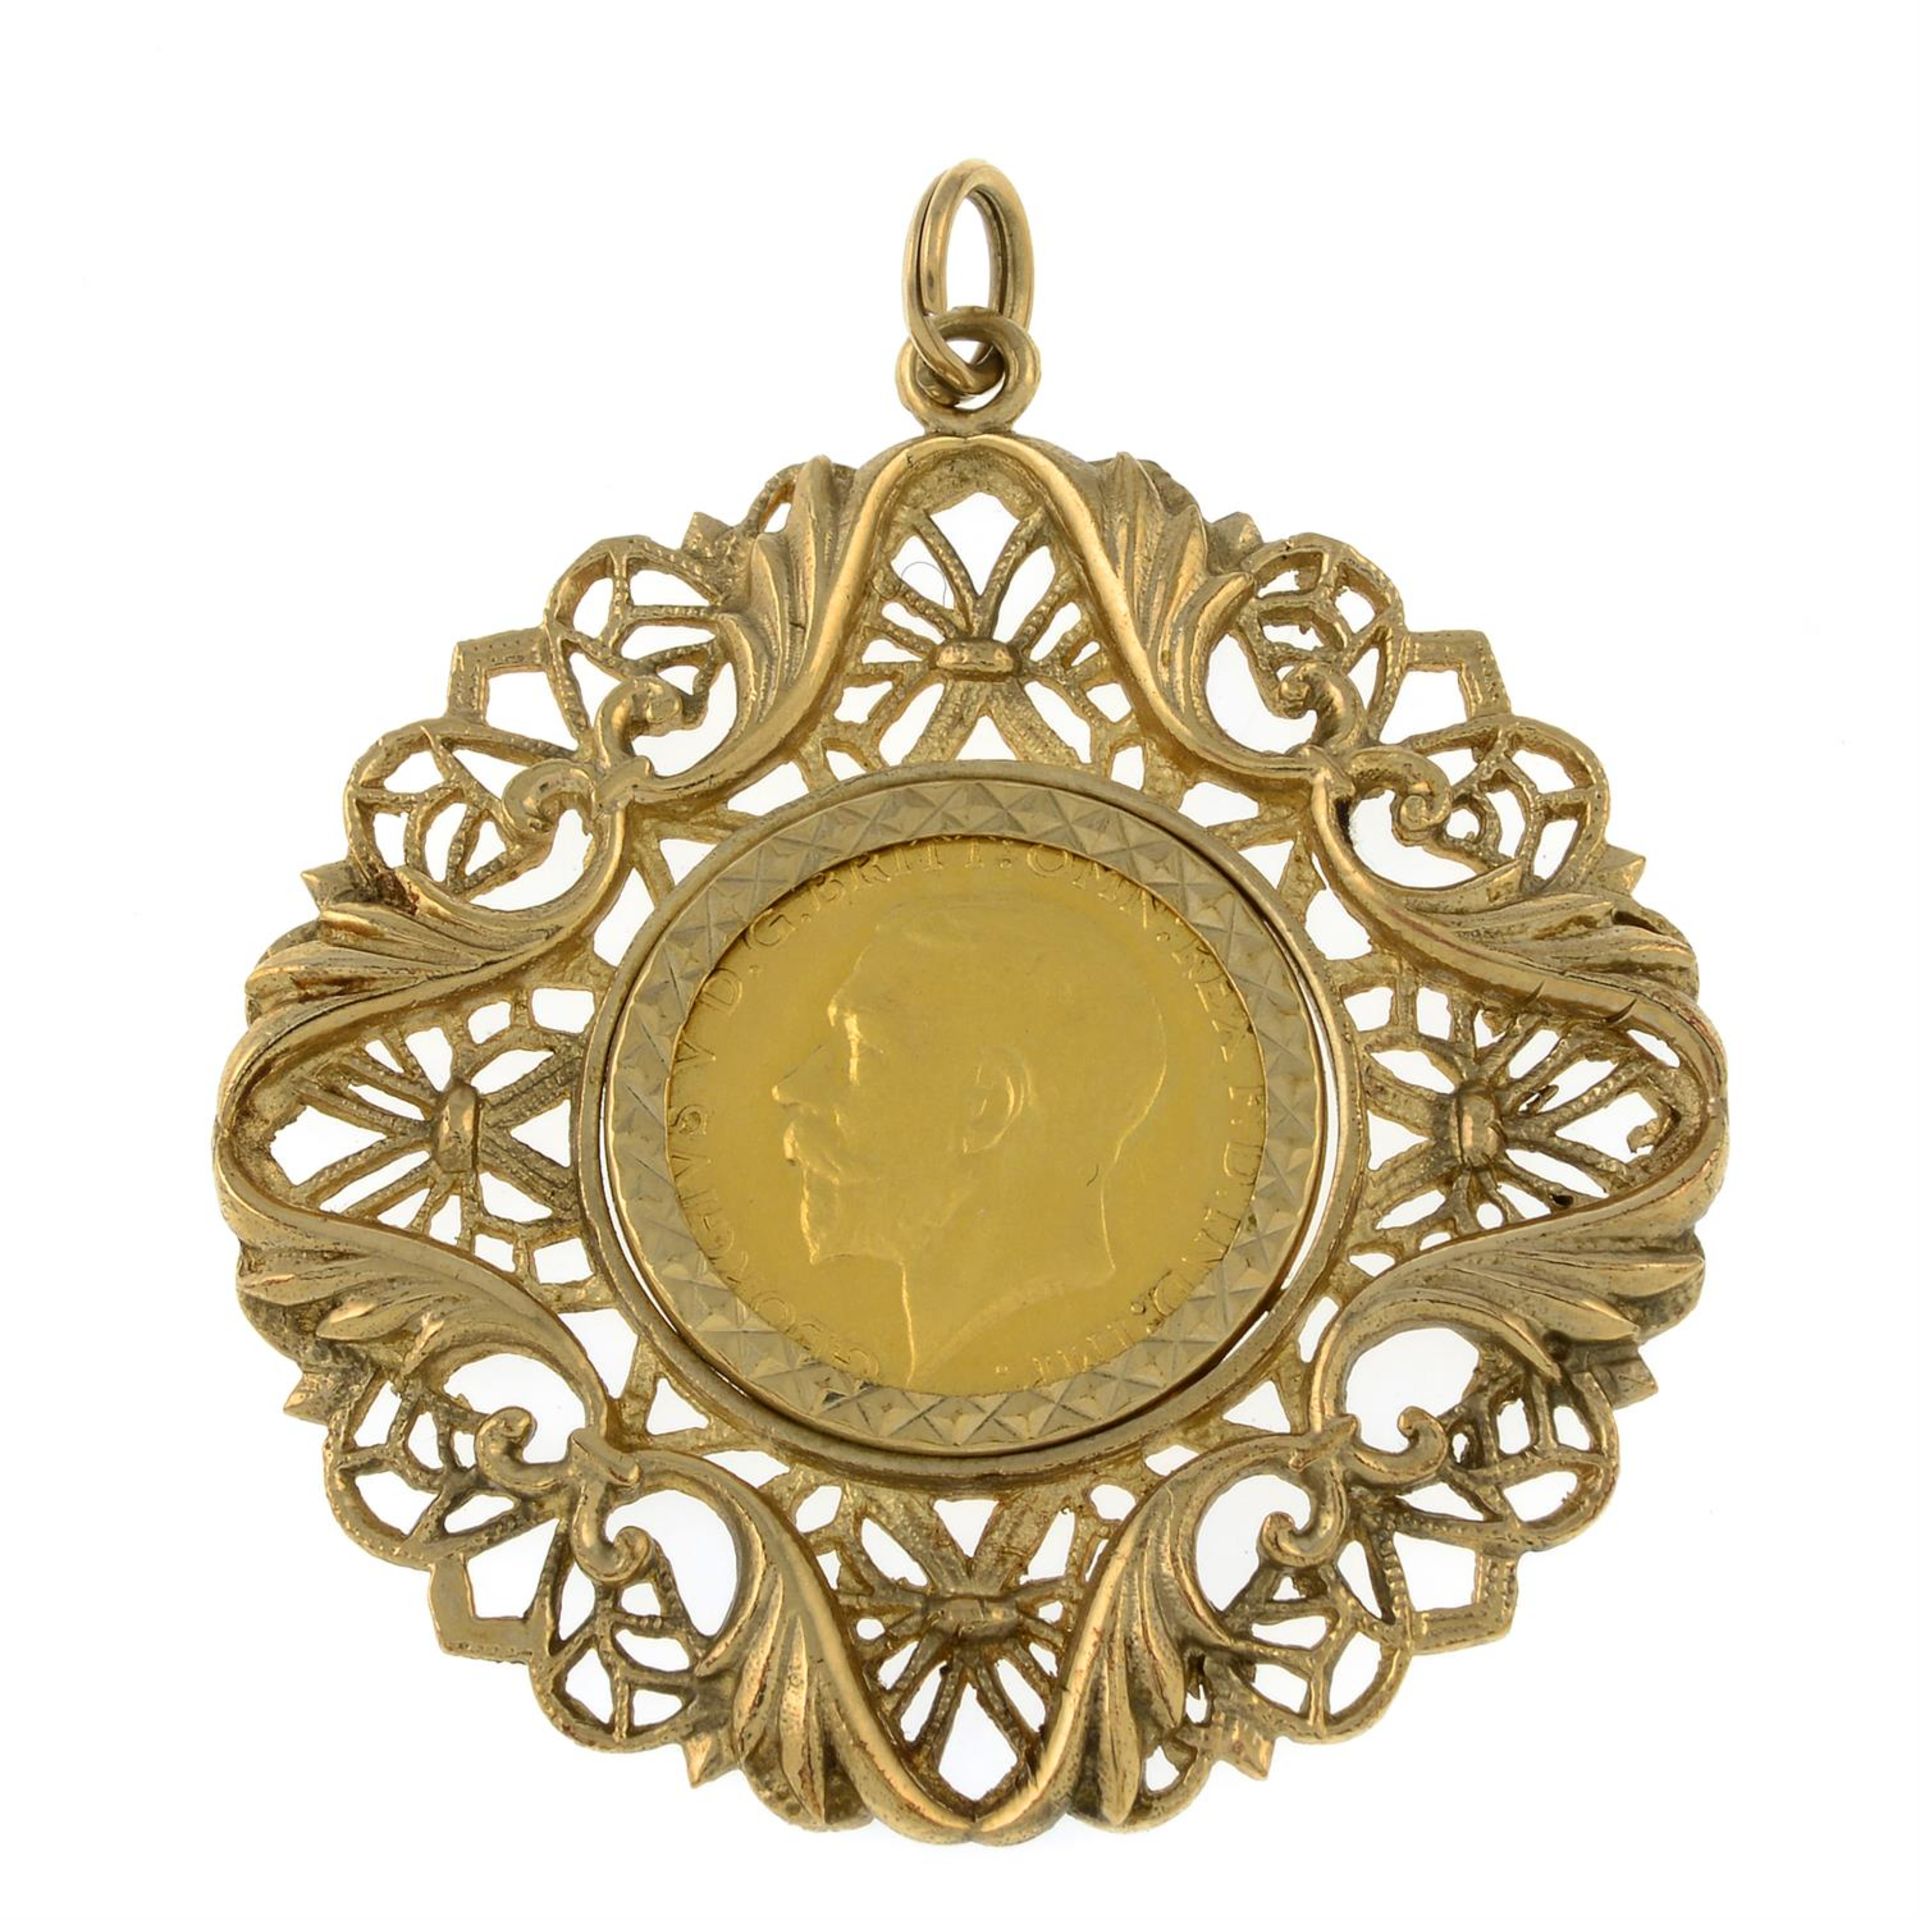 A 9ct gold mounted half sovereign pendant.